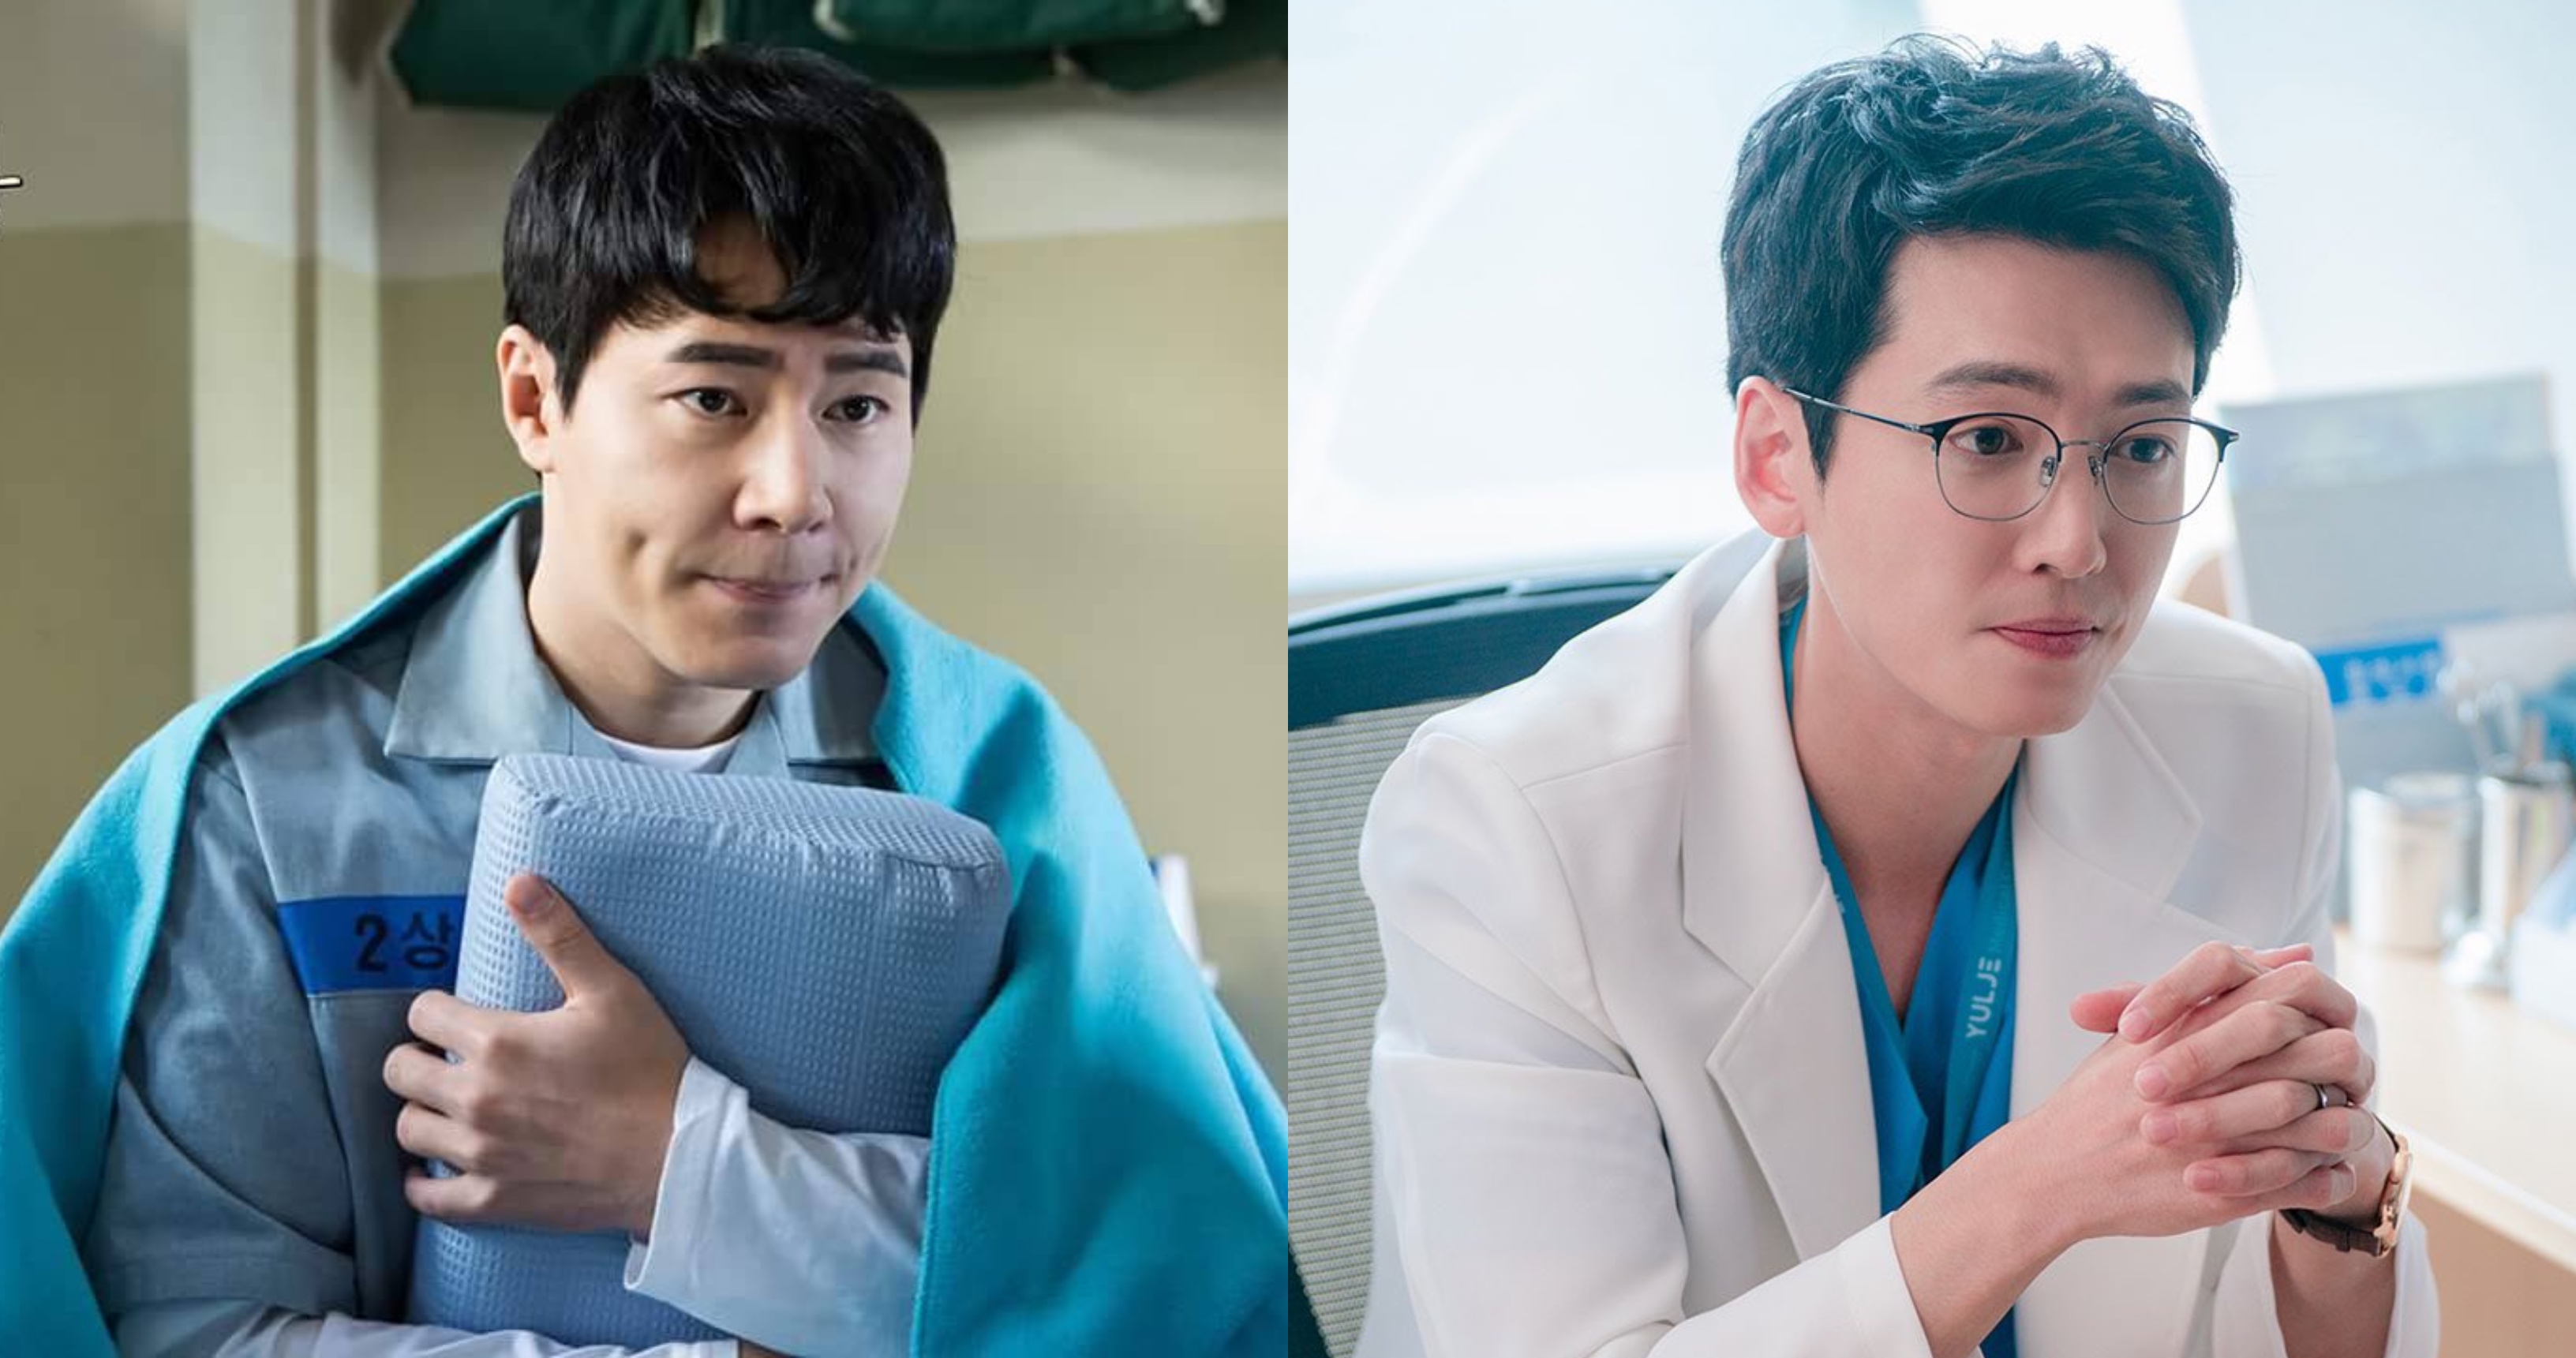 Lee Kyu-Hyung and Jung Kyung-Ho in 'Prison Playbook' and 'Hospital Playlist' wearing prison uniform and doctor's coat